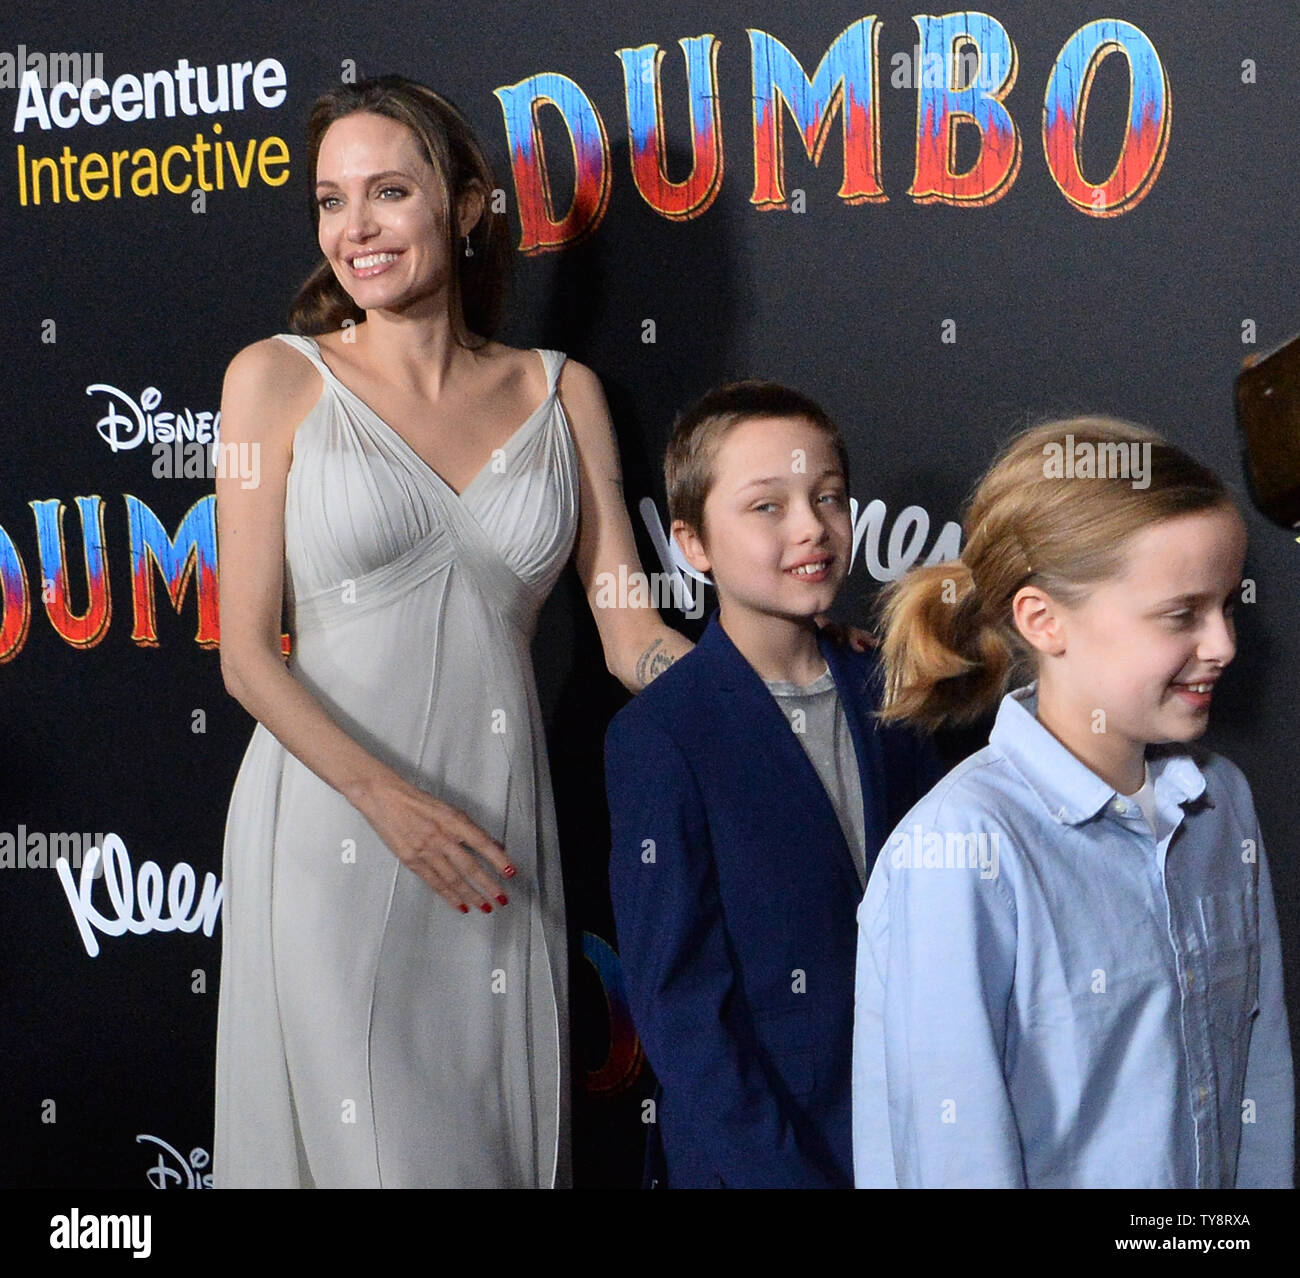 Angelina Jolie, Knox Leon Jolie-Pitt and Vivienne Marcheline Jolie-Pitt (L-R) attend the premiere of the motion picture fantasy "Dumbo" at the Ray Dolby Ballroom, Loews Hollywood Hotel in the Hollywood section of Los Angeles on March 11, 2019. Storyline: A young elephant, whose oversized ears enable him to fly, helps save a struggling circus, but when the circus plans a new venture, Dumbo and his friends discover dark secrets beneath its shiny veneer.  Photo by Jim Ruymen/UPI Stock Photo